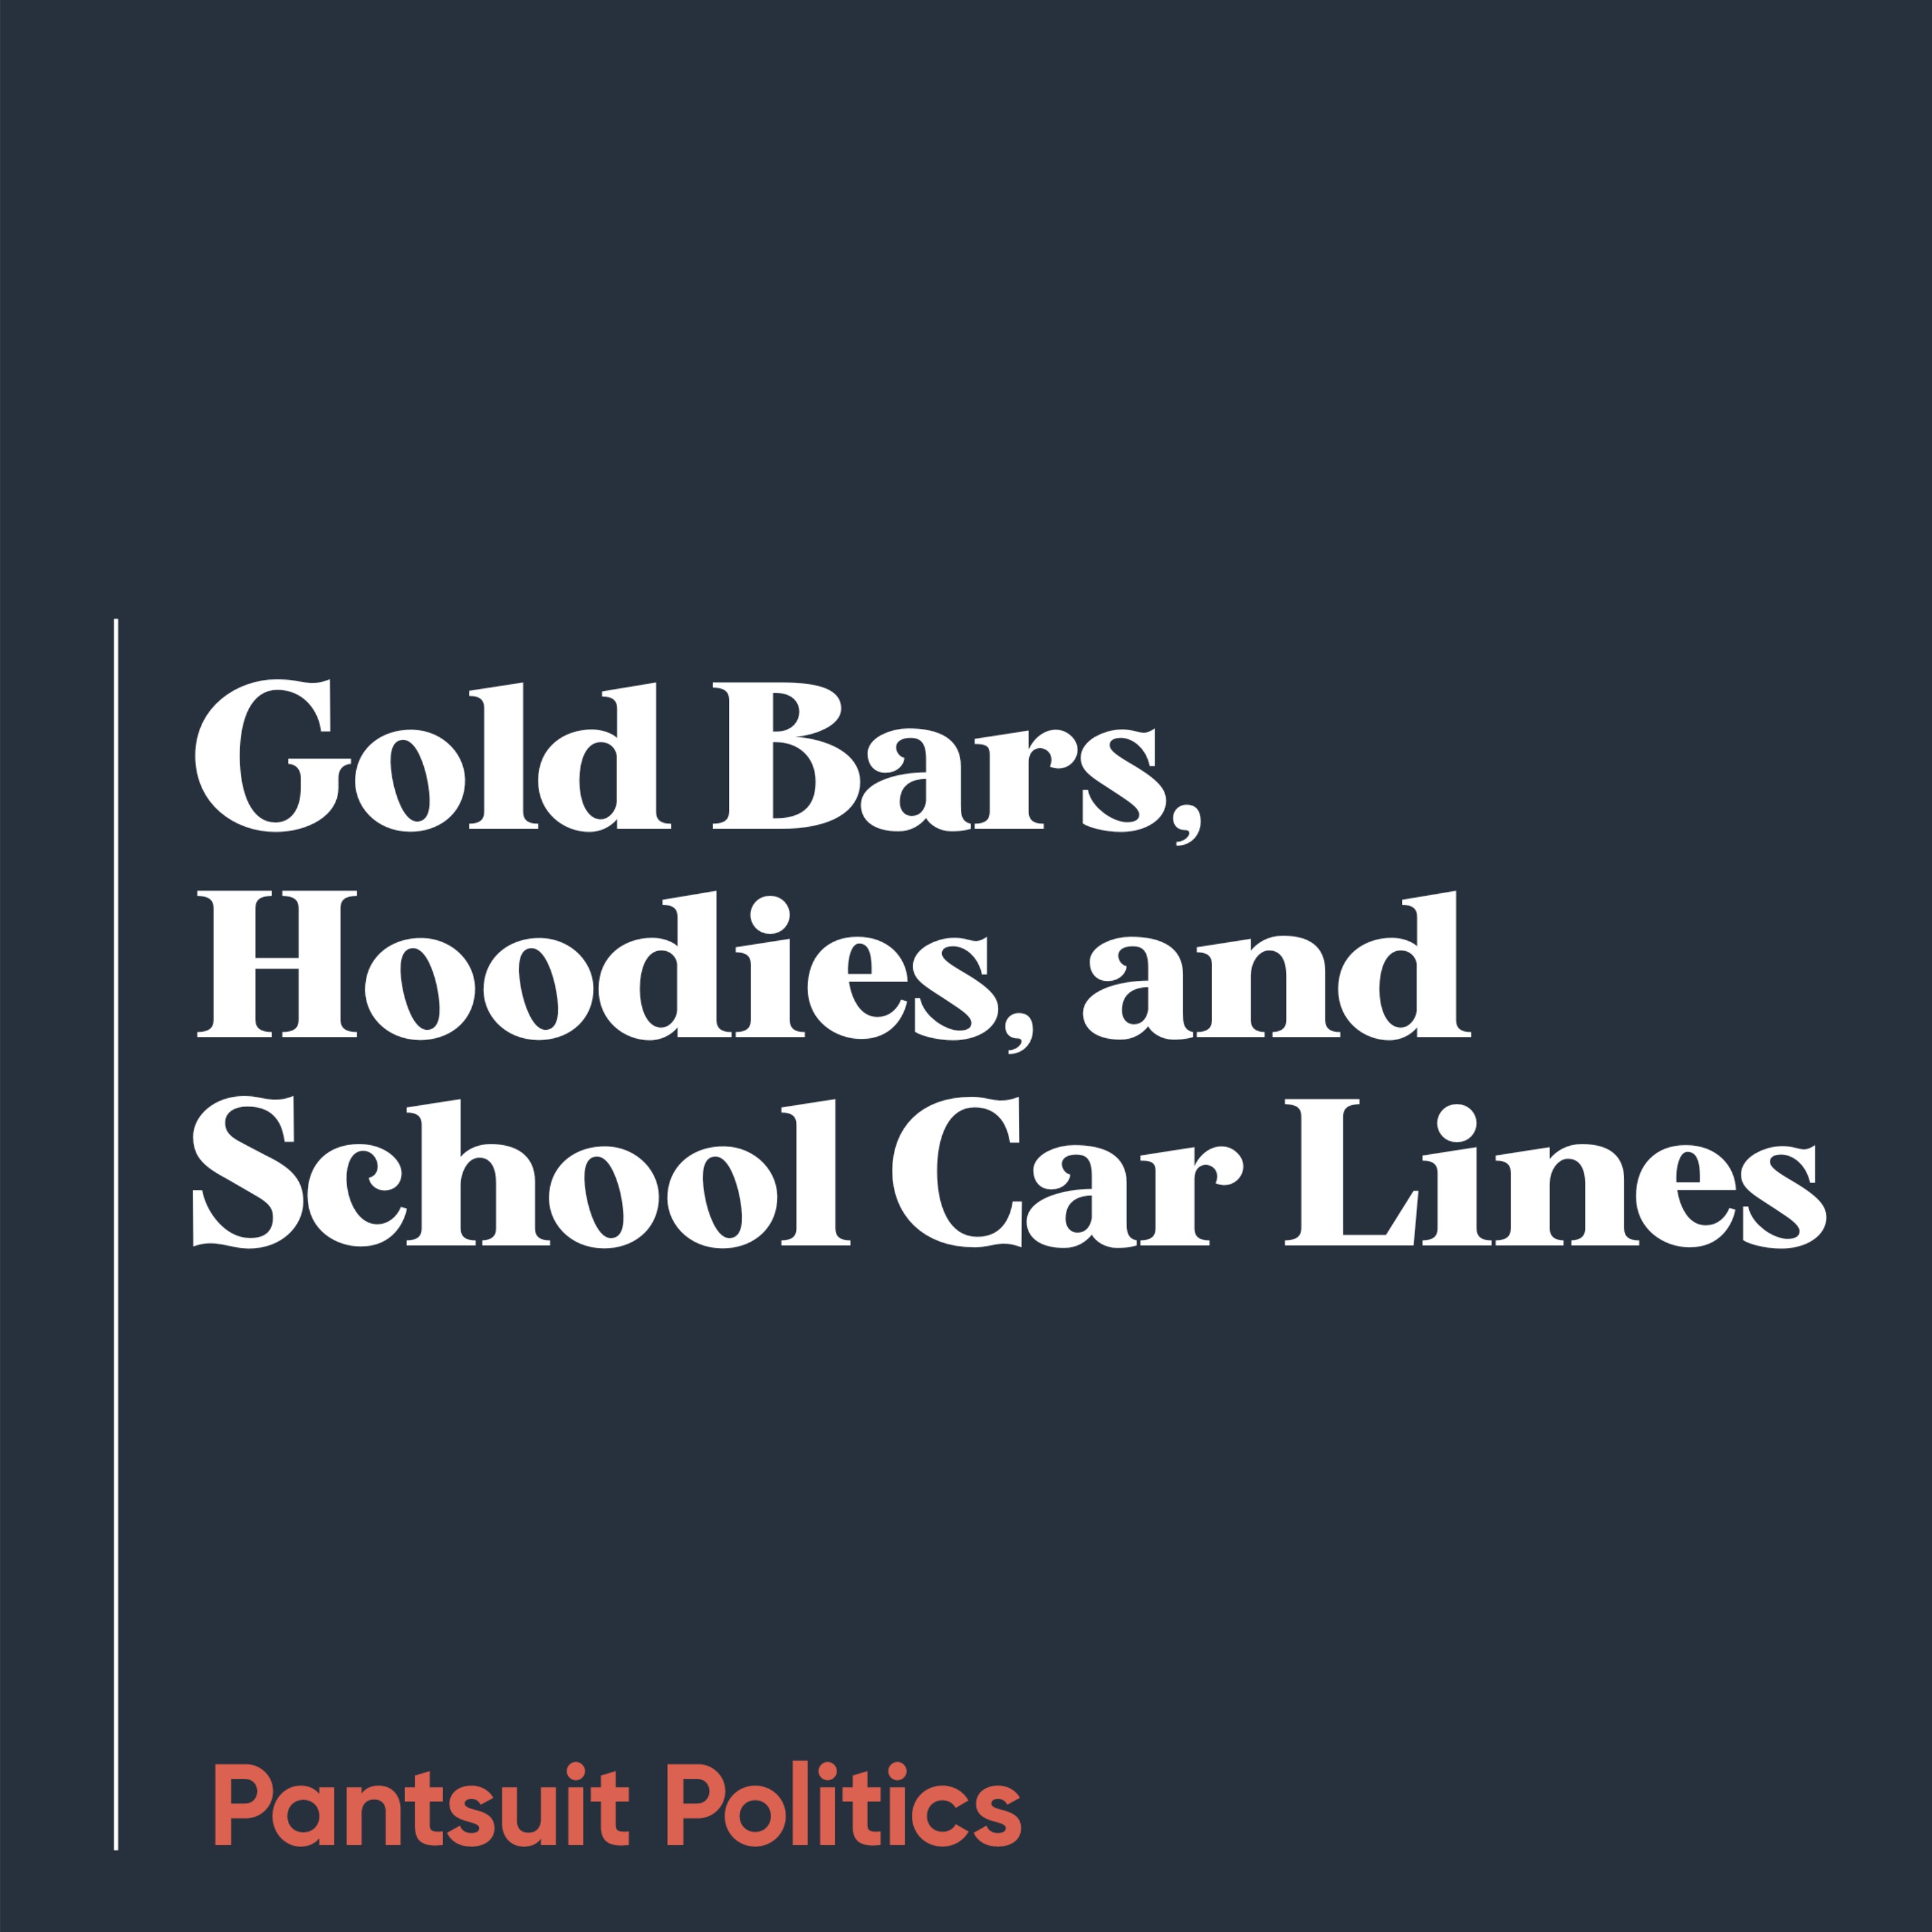 Gold Bars, Hoodies, and School Car Lines